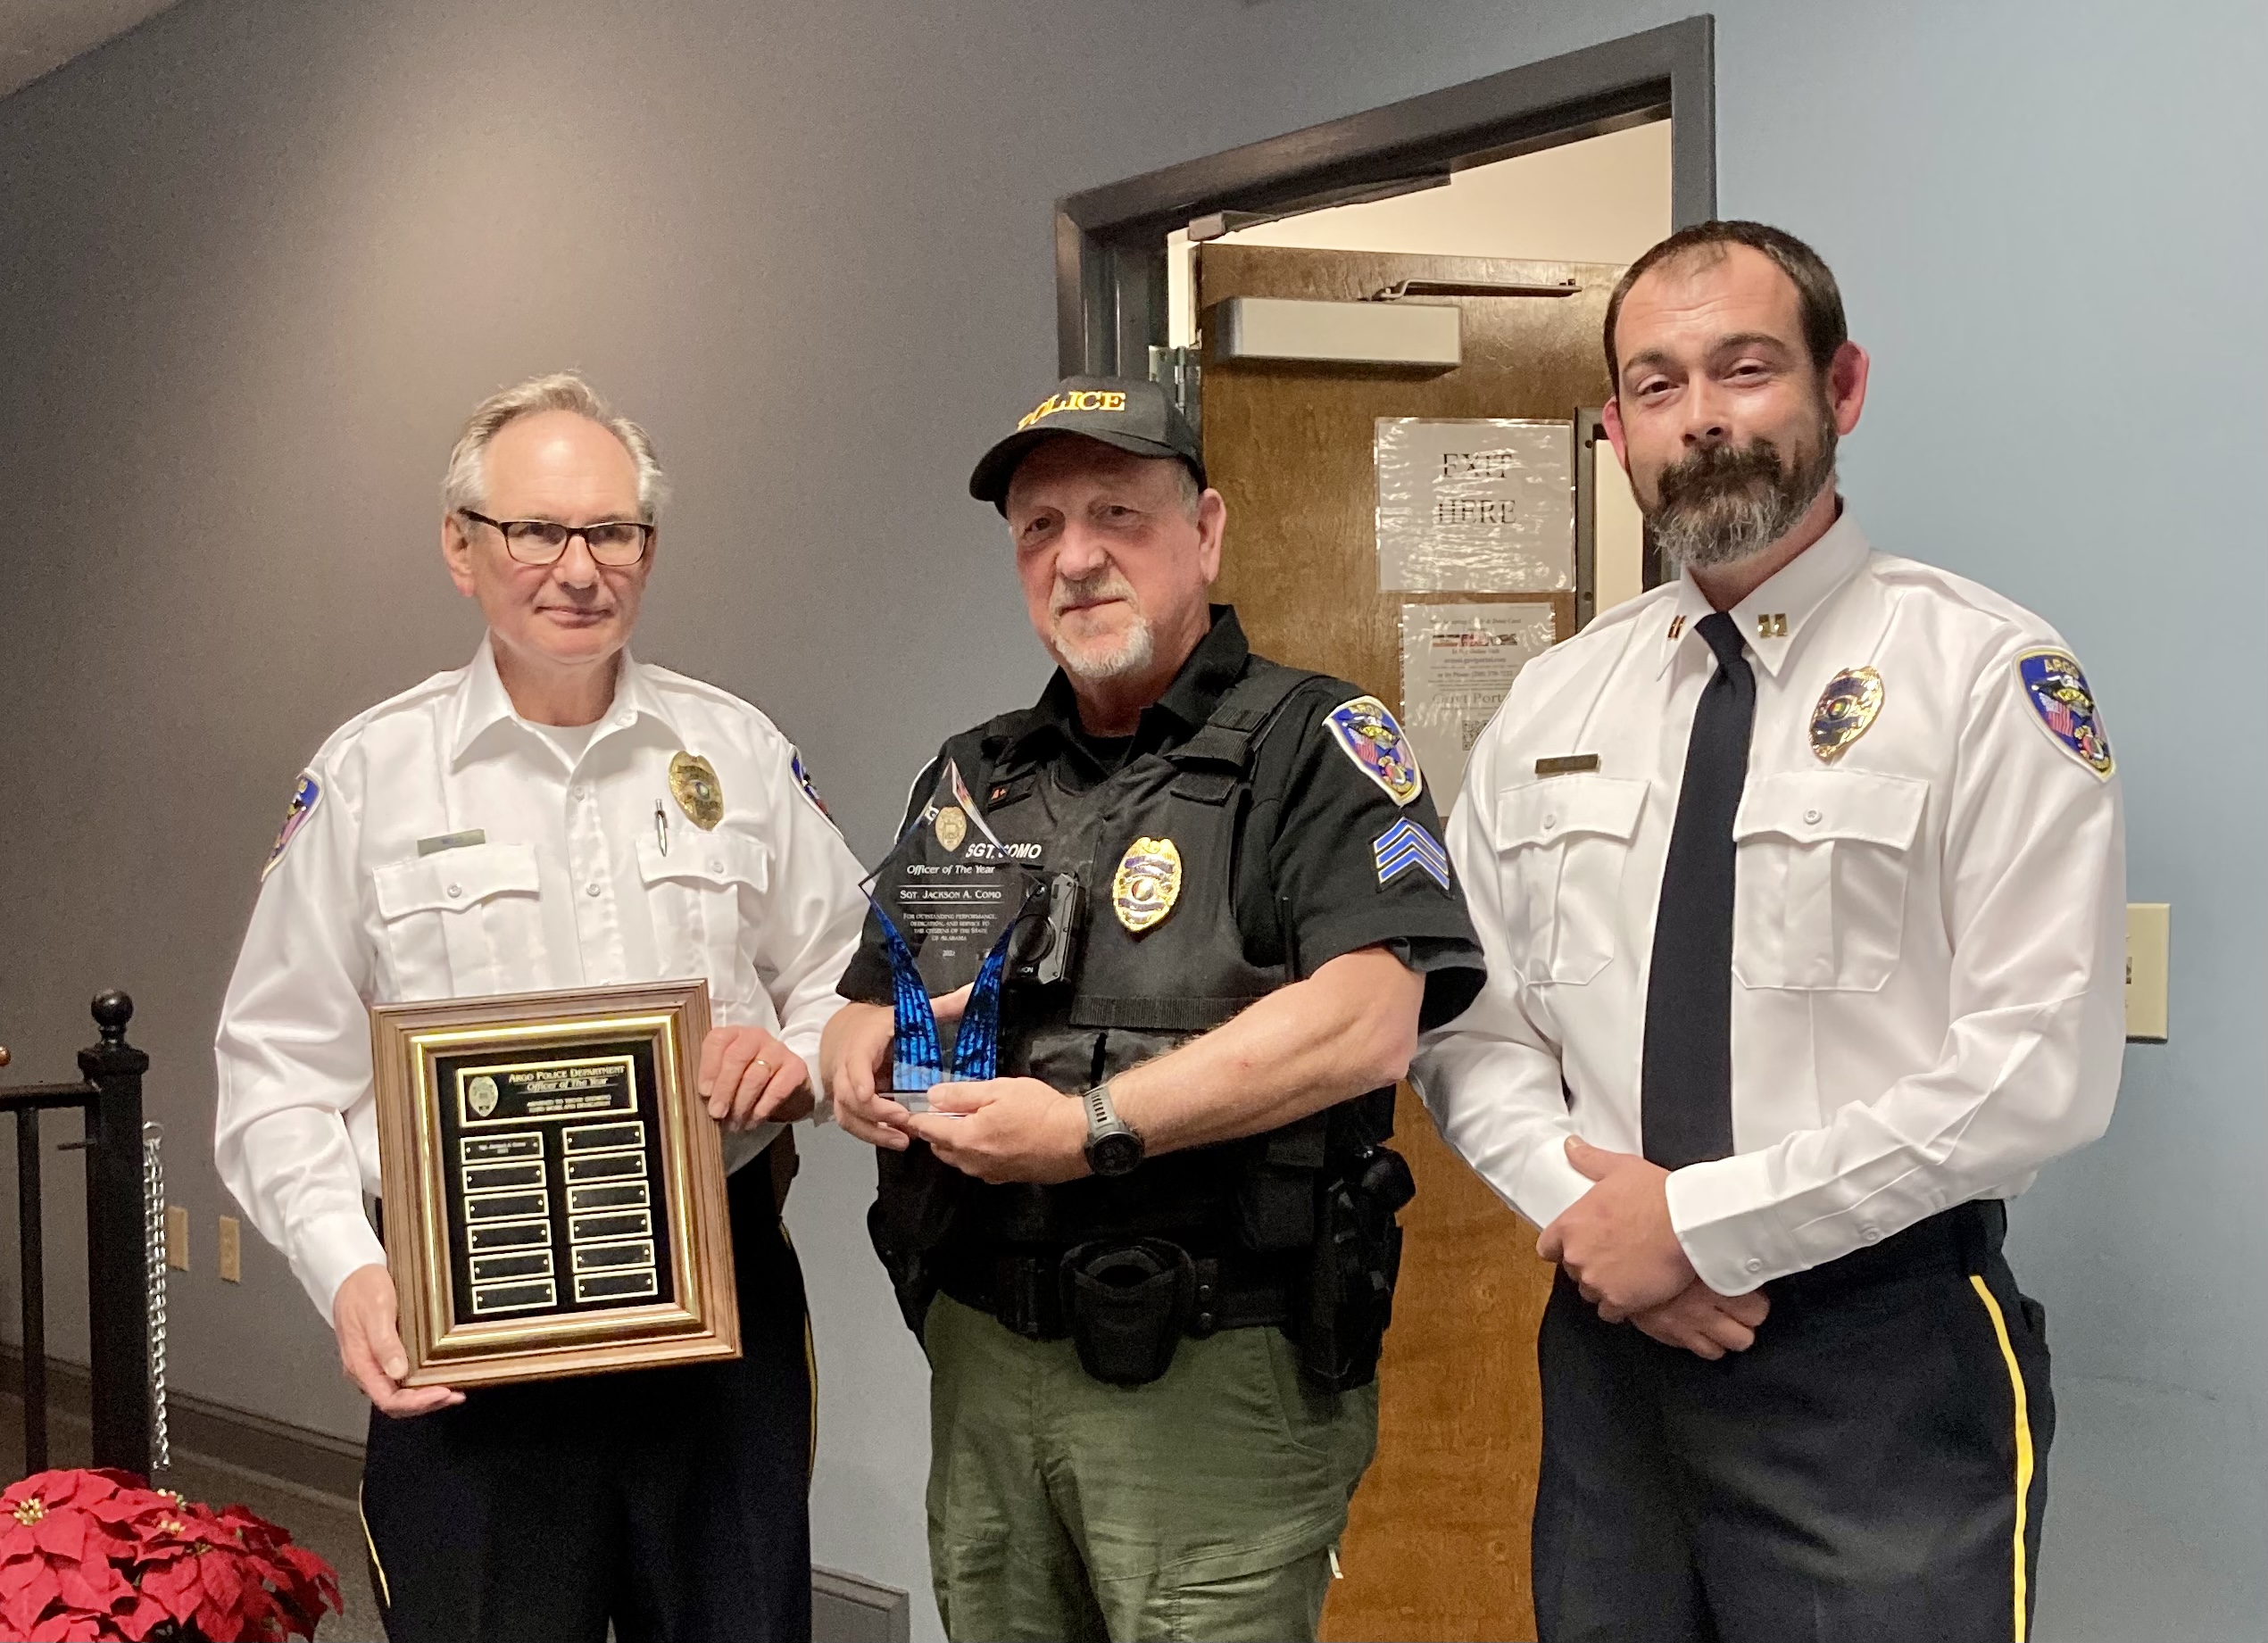 Argo Police Sgt. Jack Como named ‘Officer of the Year’